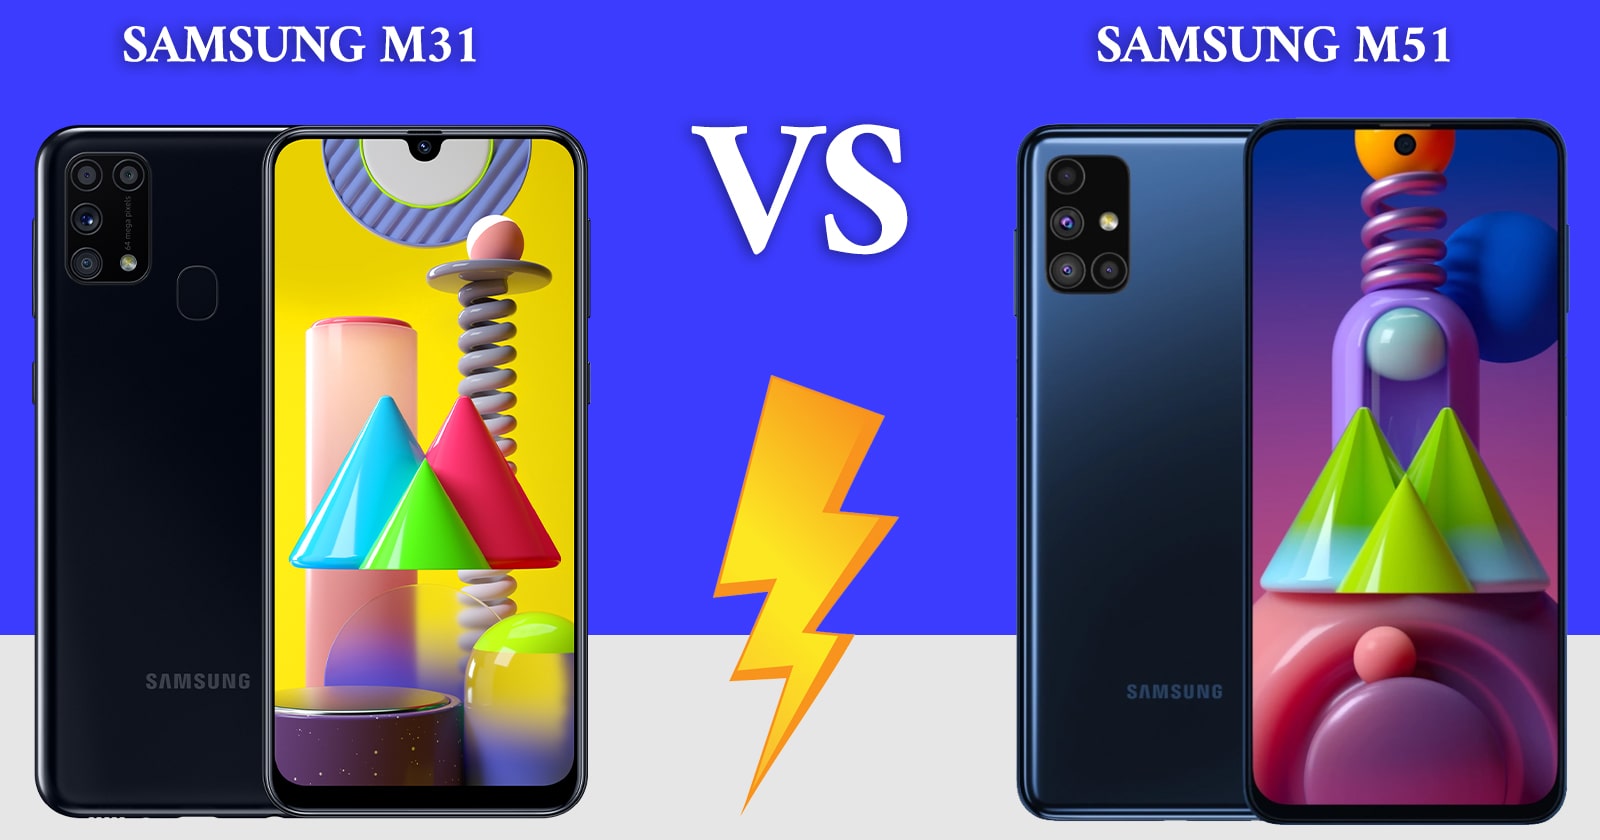 What Is the Difference Between Samsung M31 and M51